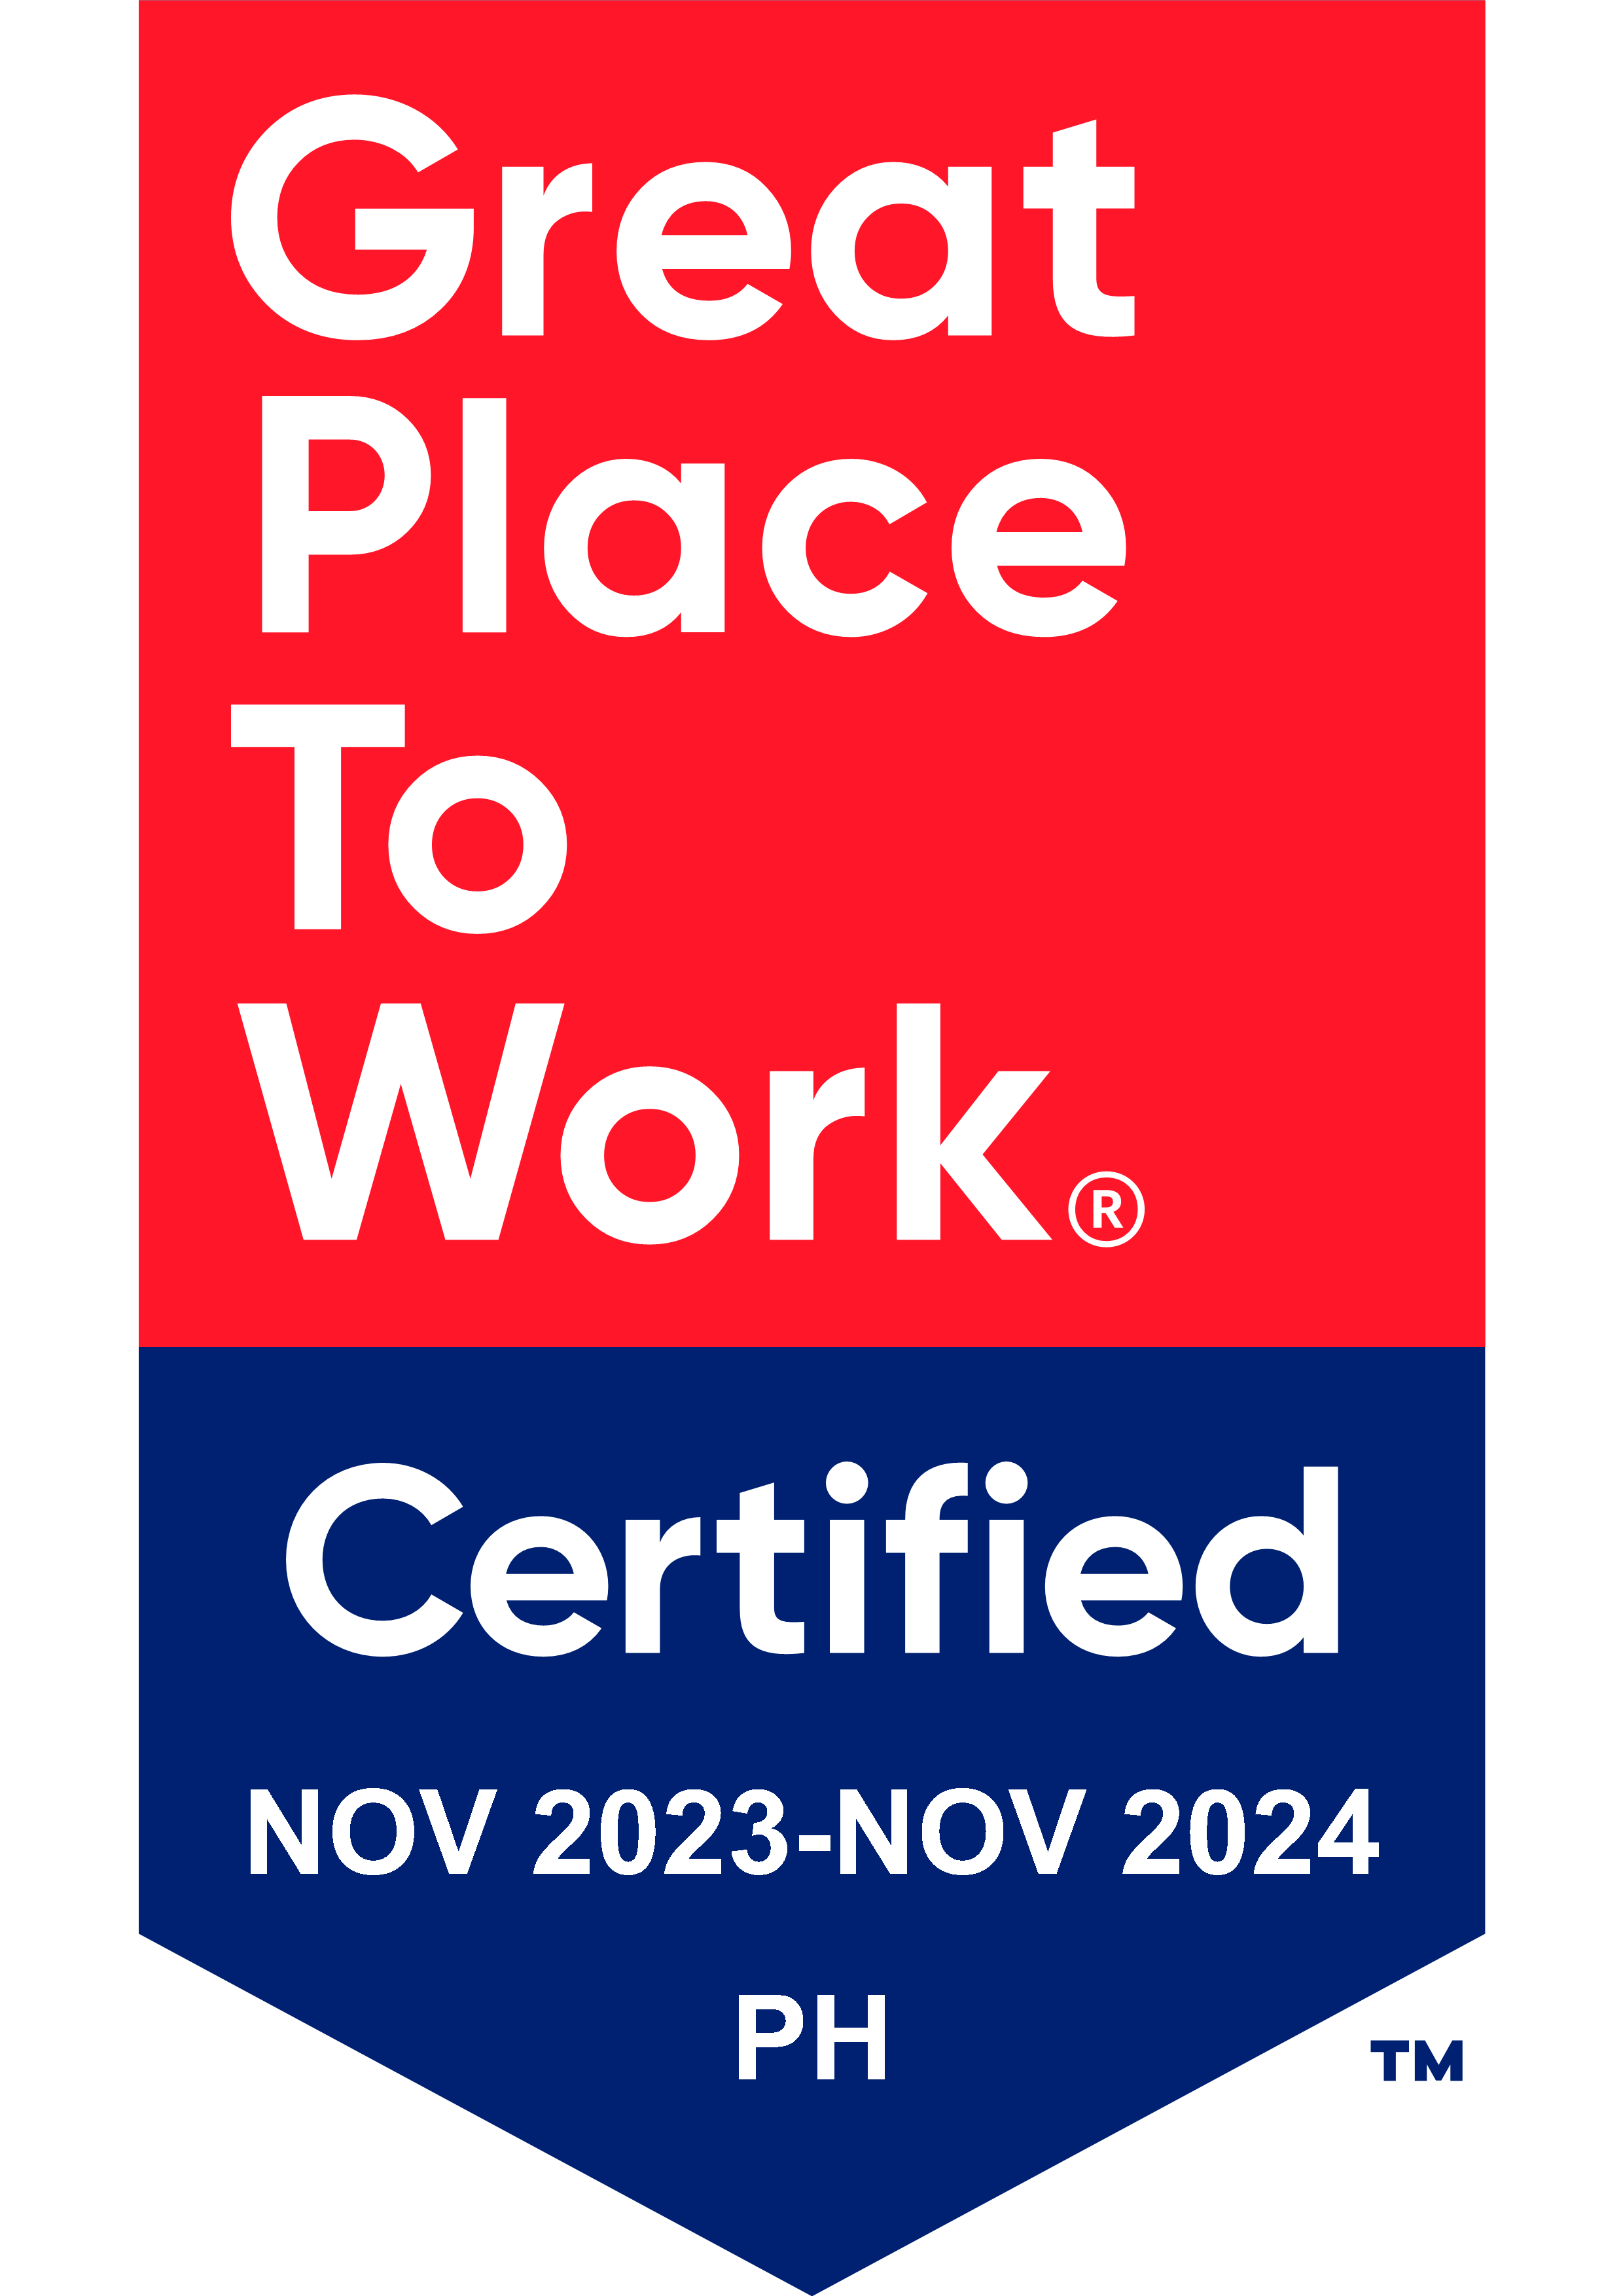 Great Place To Work - Certification